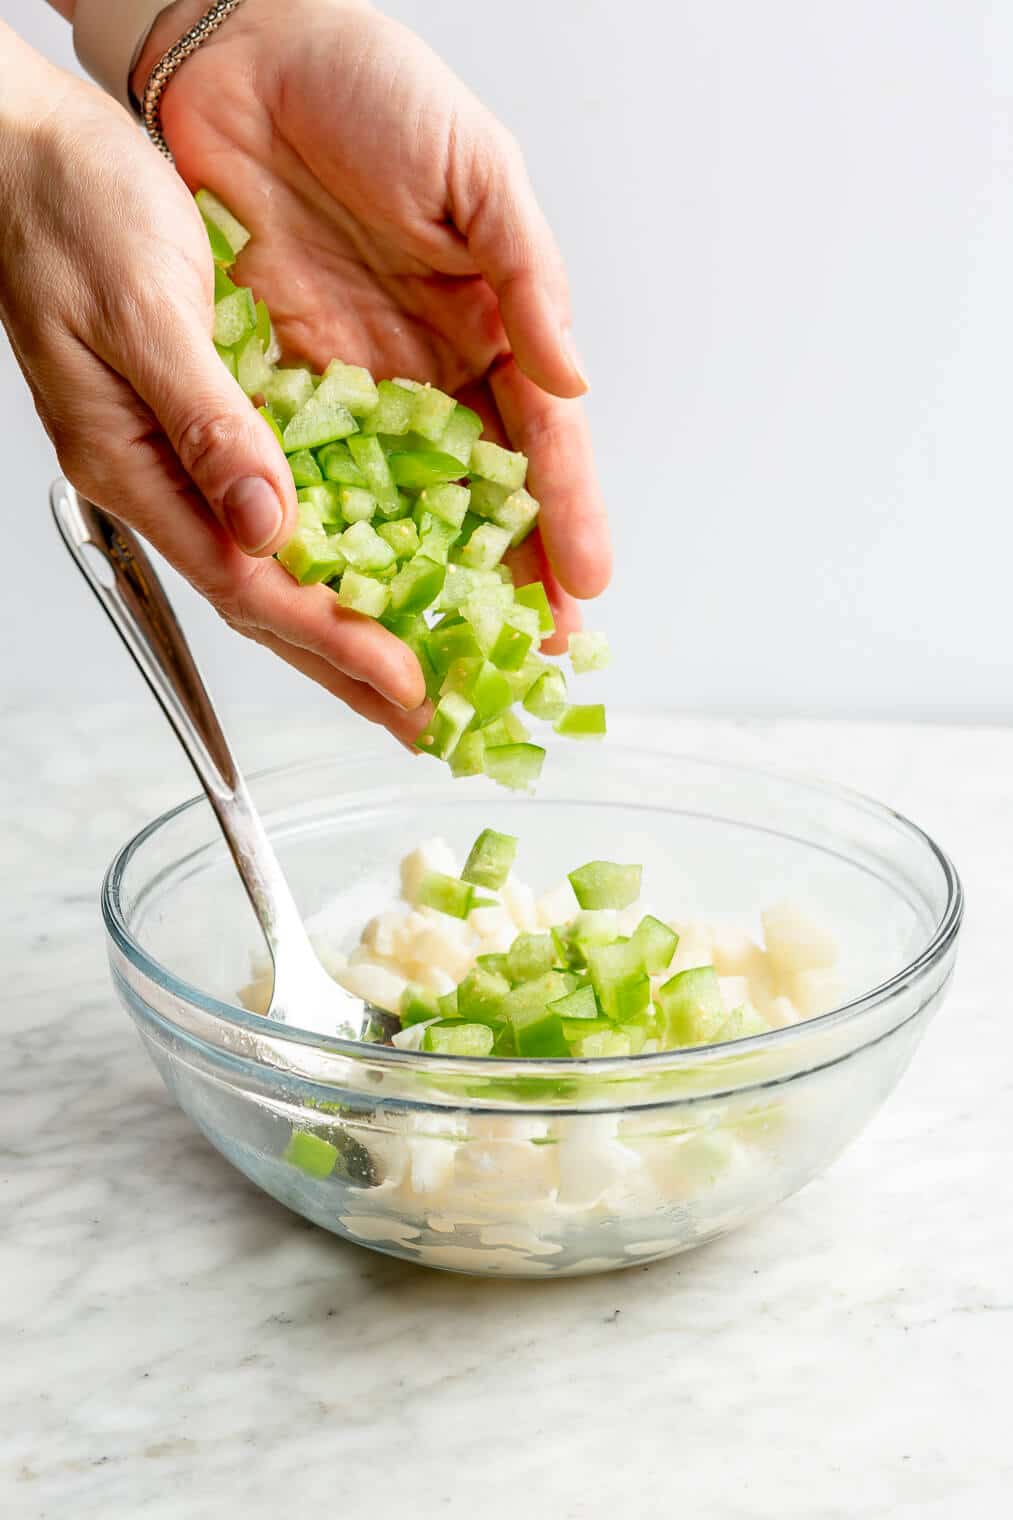 Hands dropping diced tomatillos into a large glass bowl with cubed white fish.